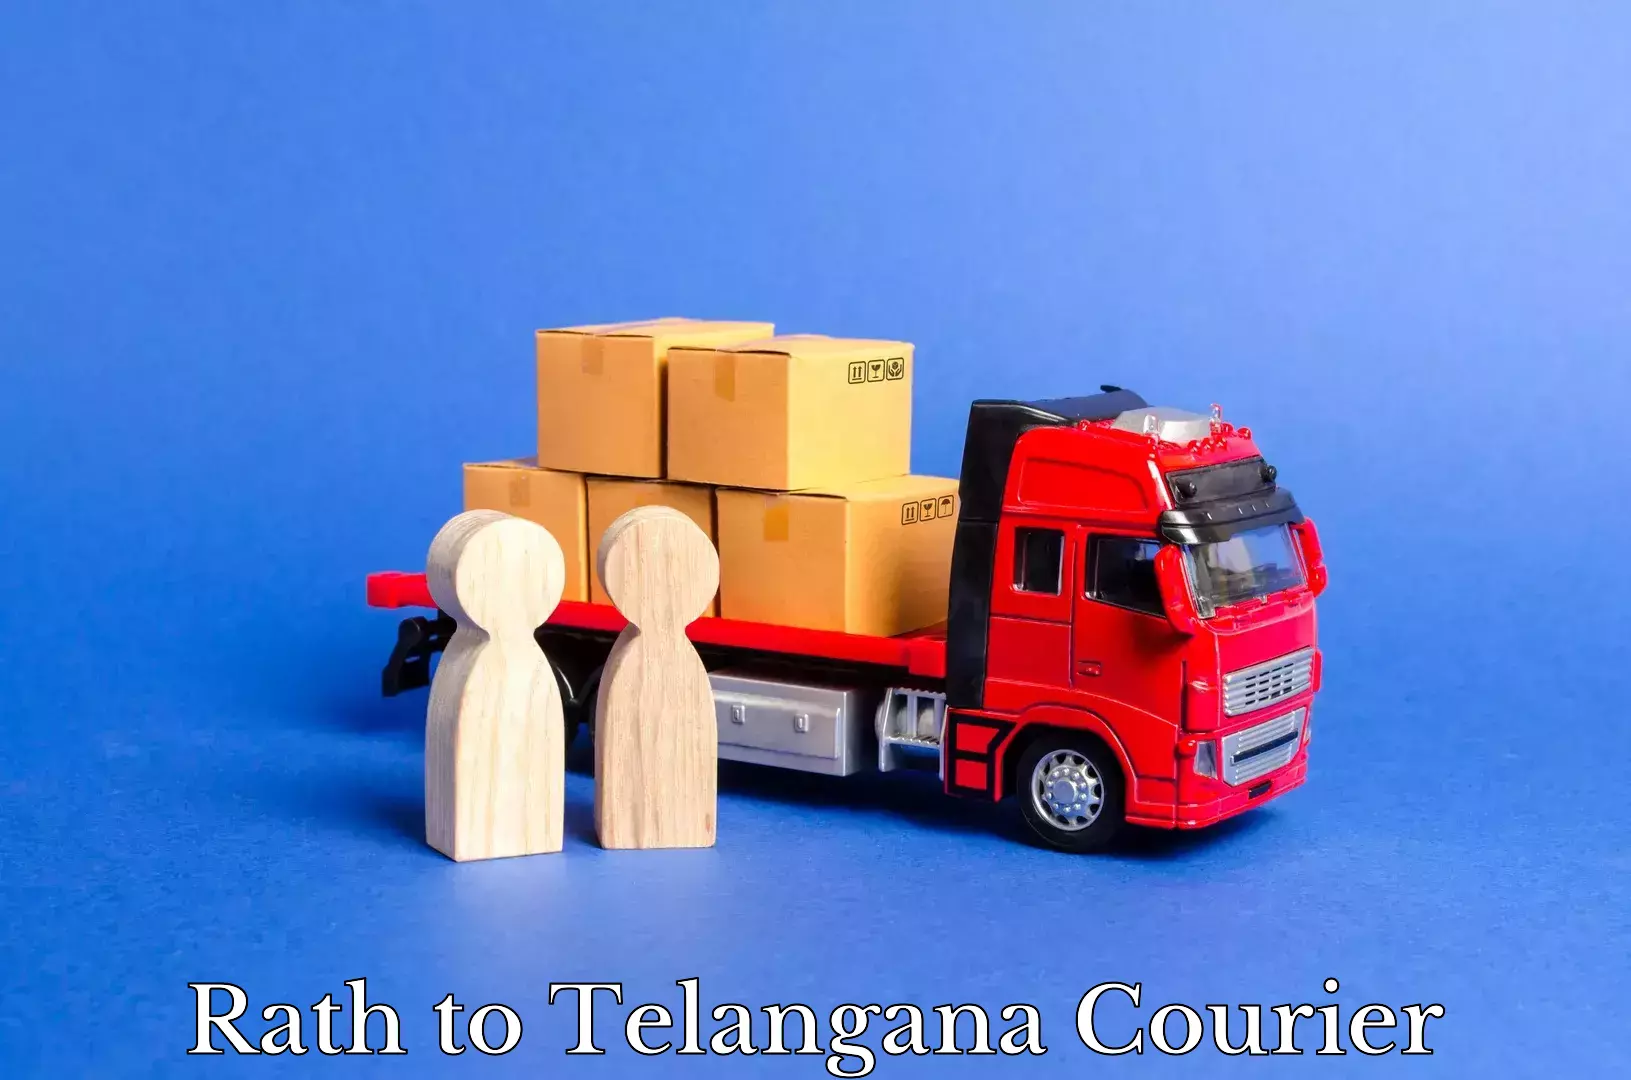 Local delivery service Rath to Telangana